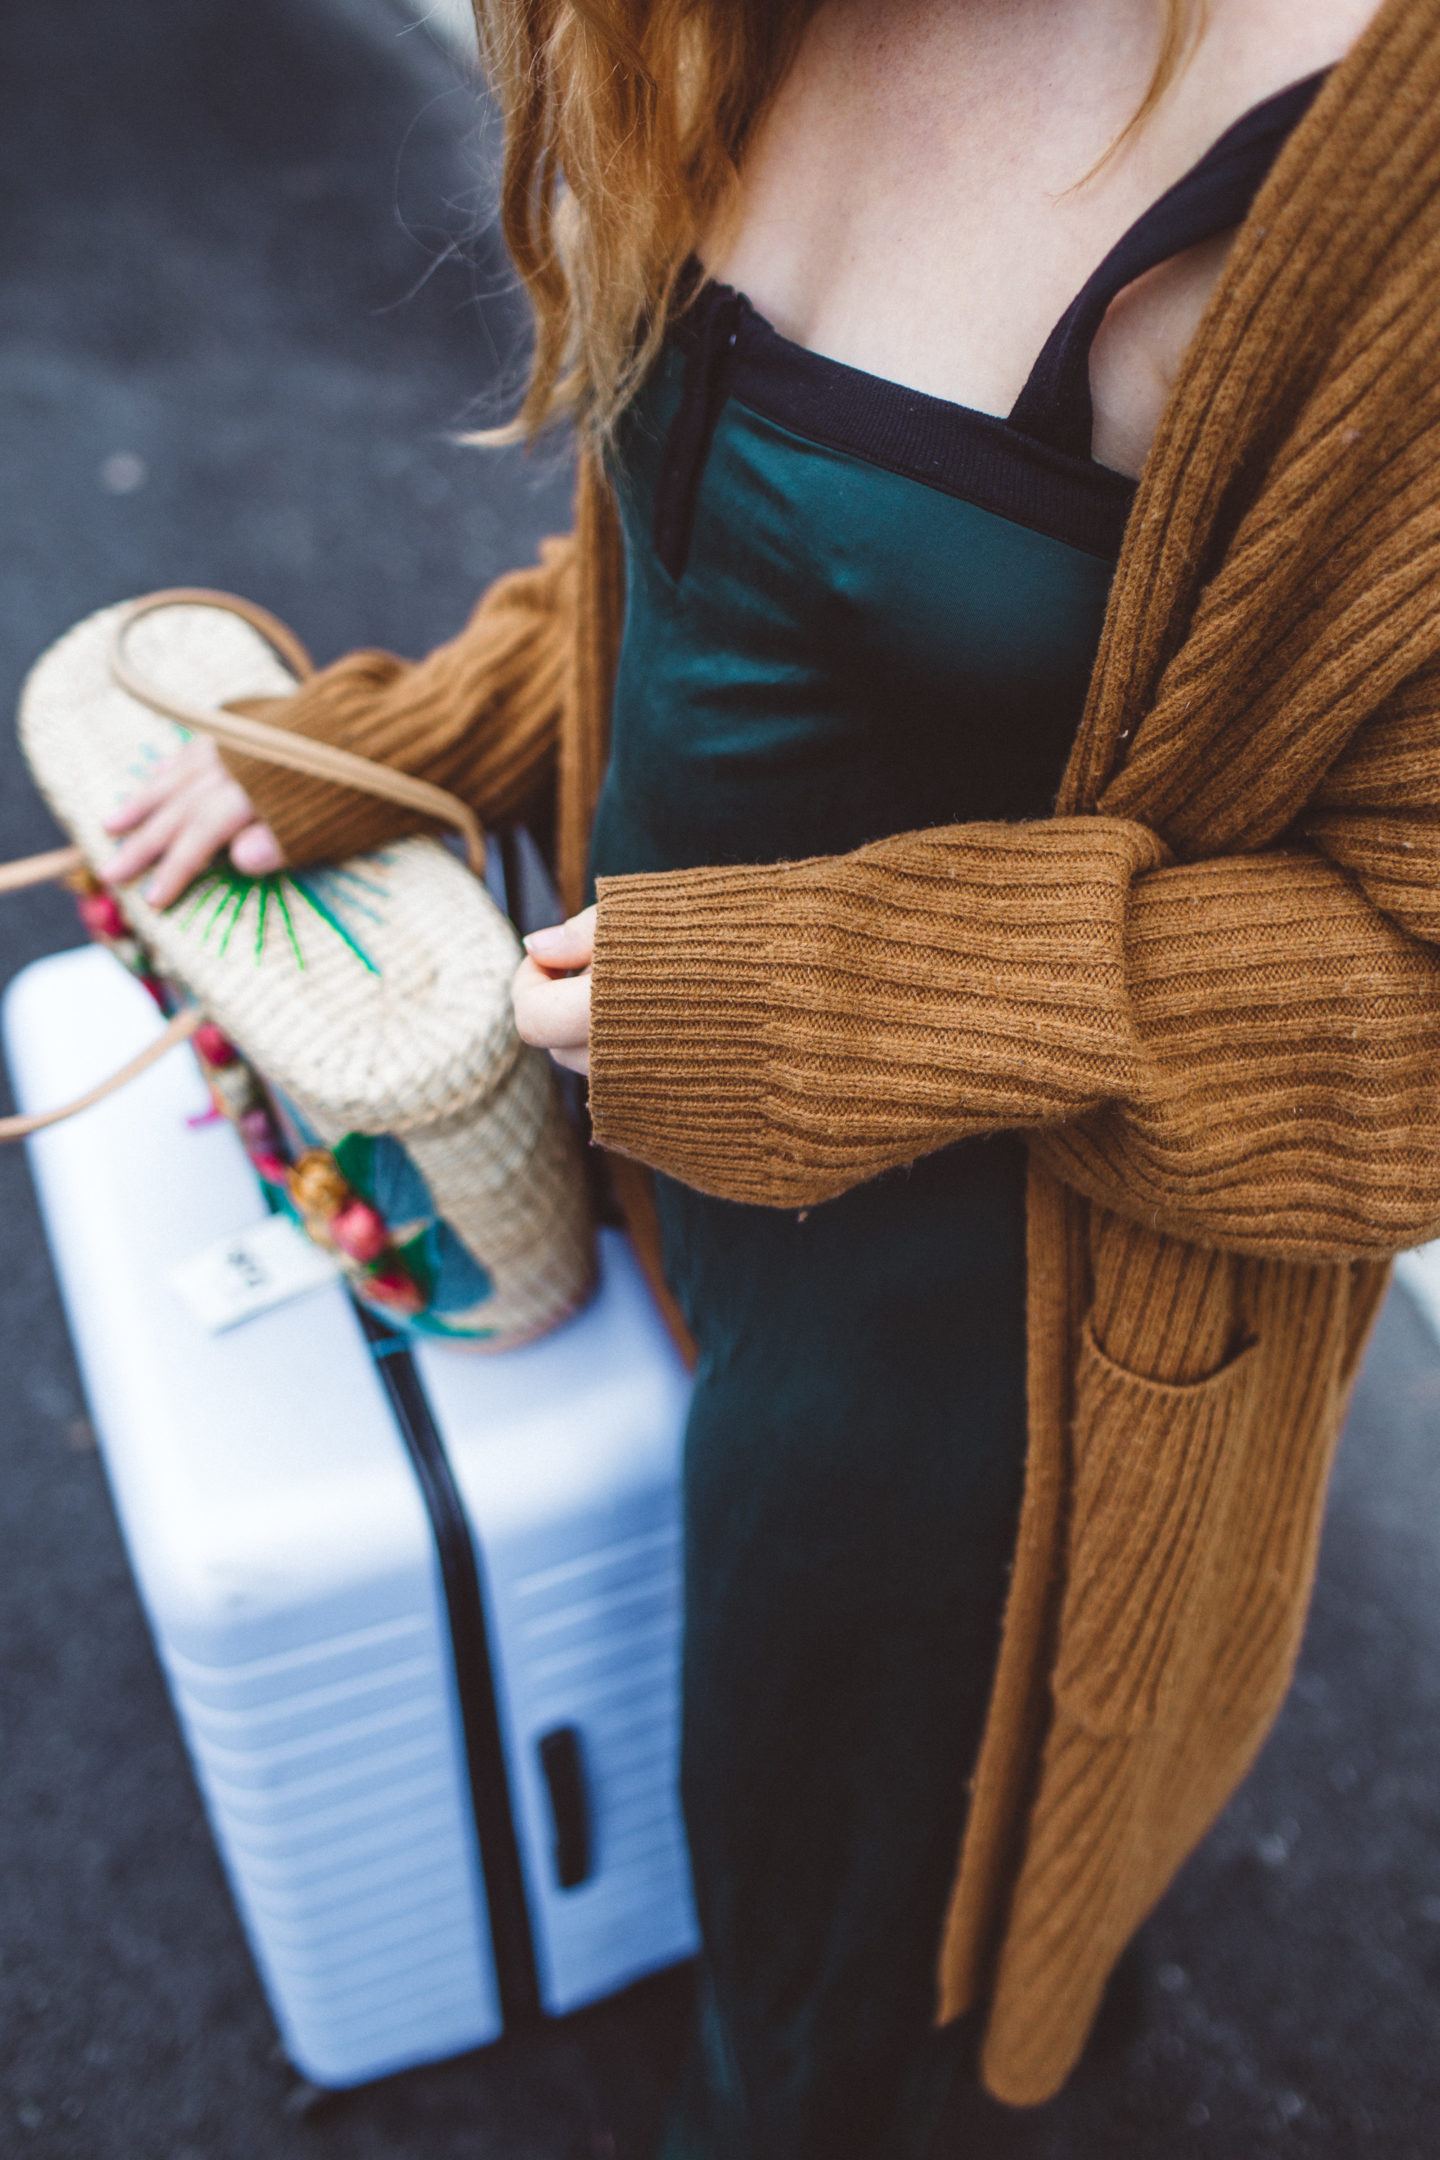 4 Stylish Airport Outfit Ideas To Look Chic AF While Traveling